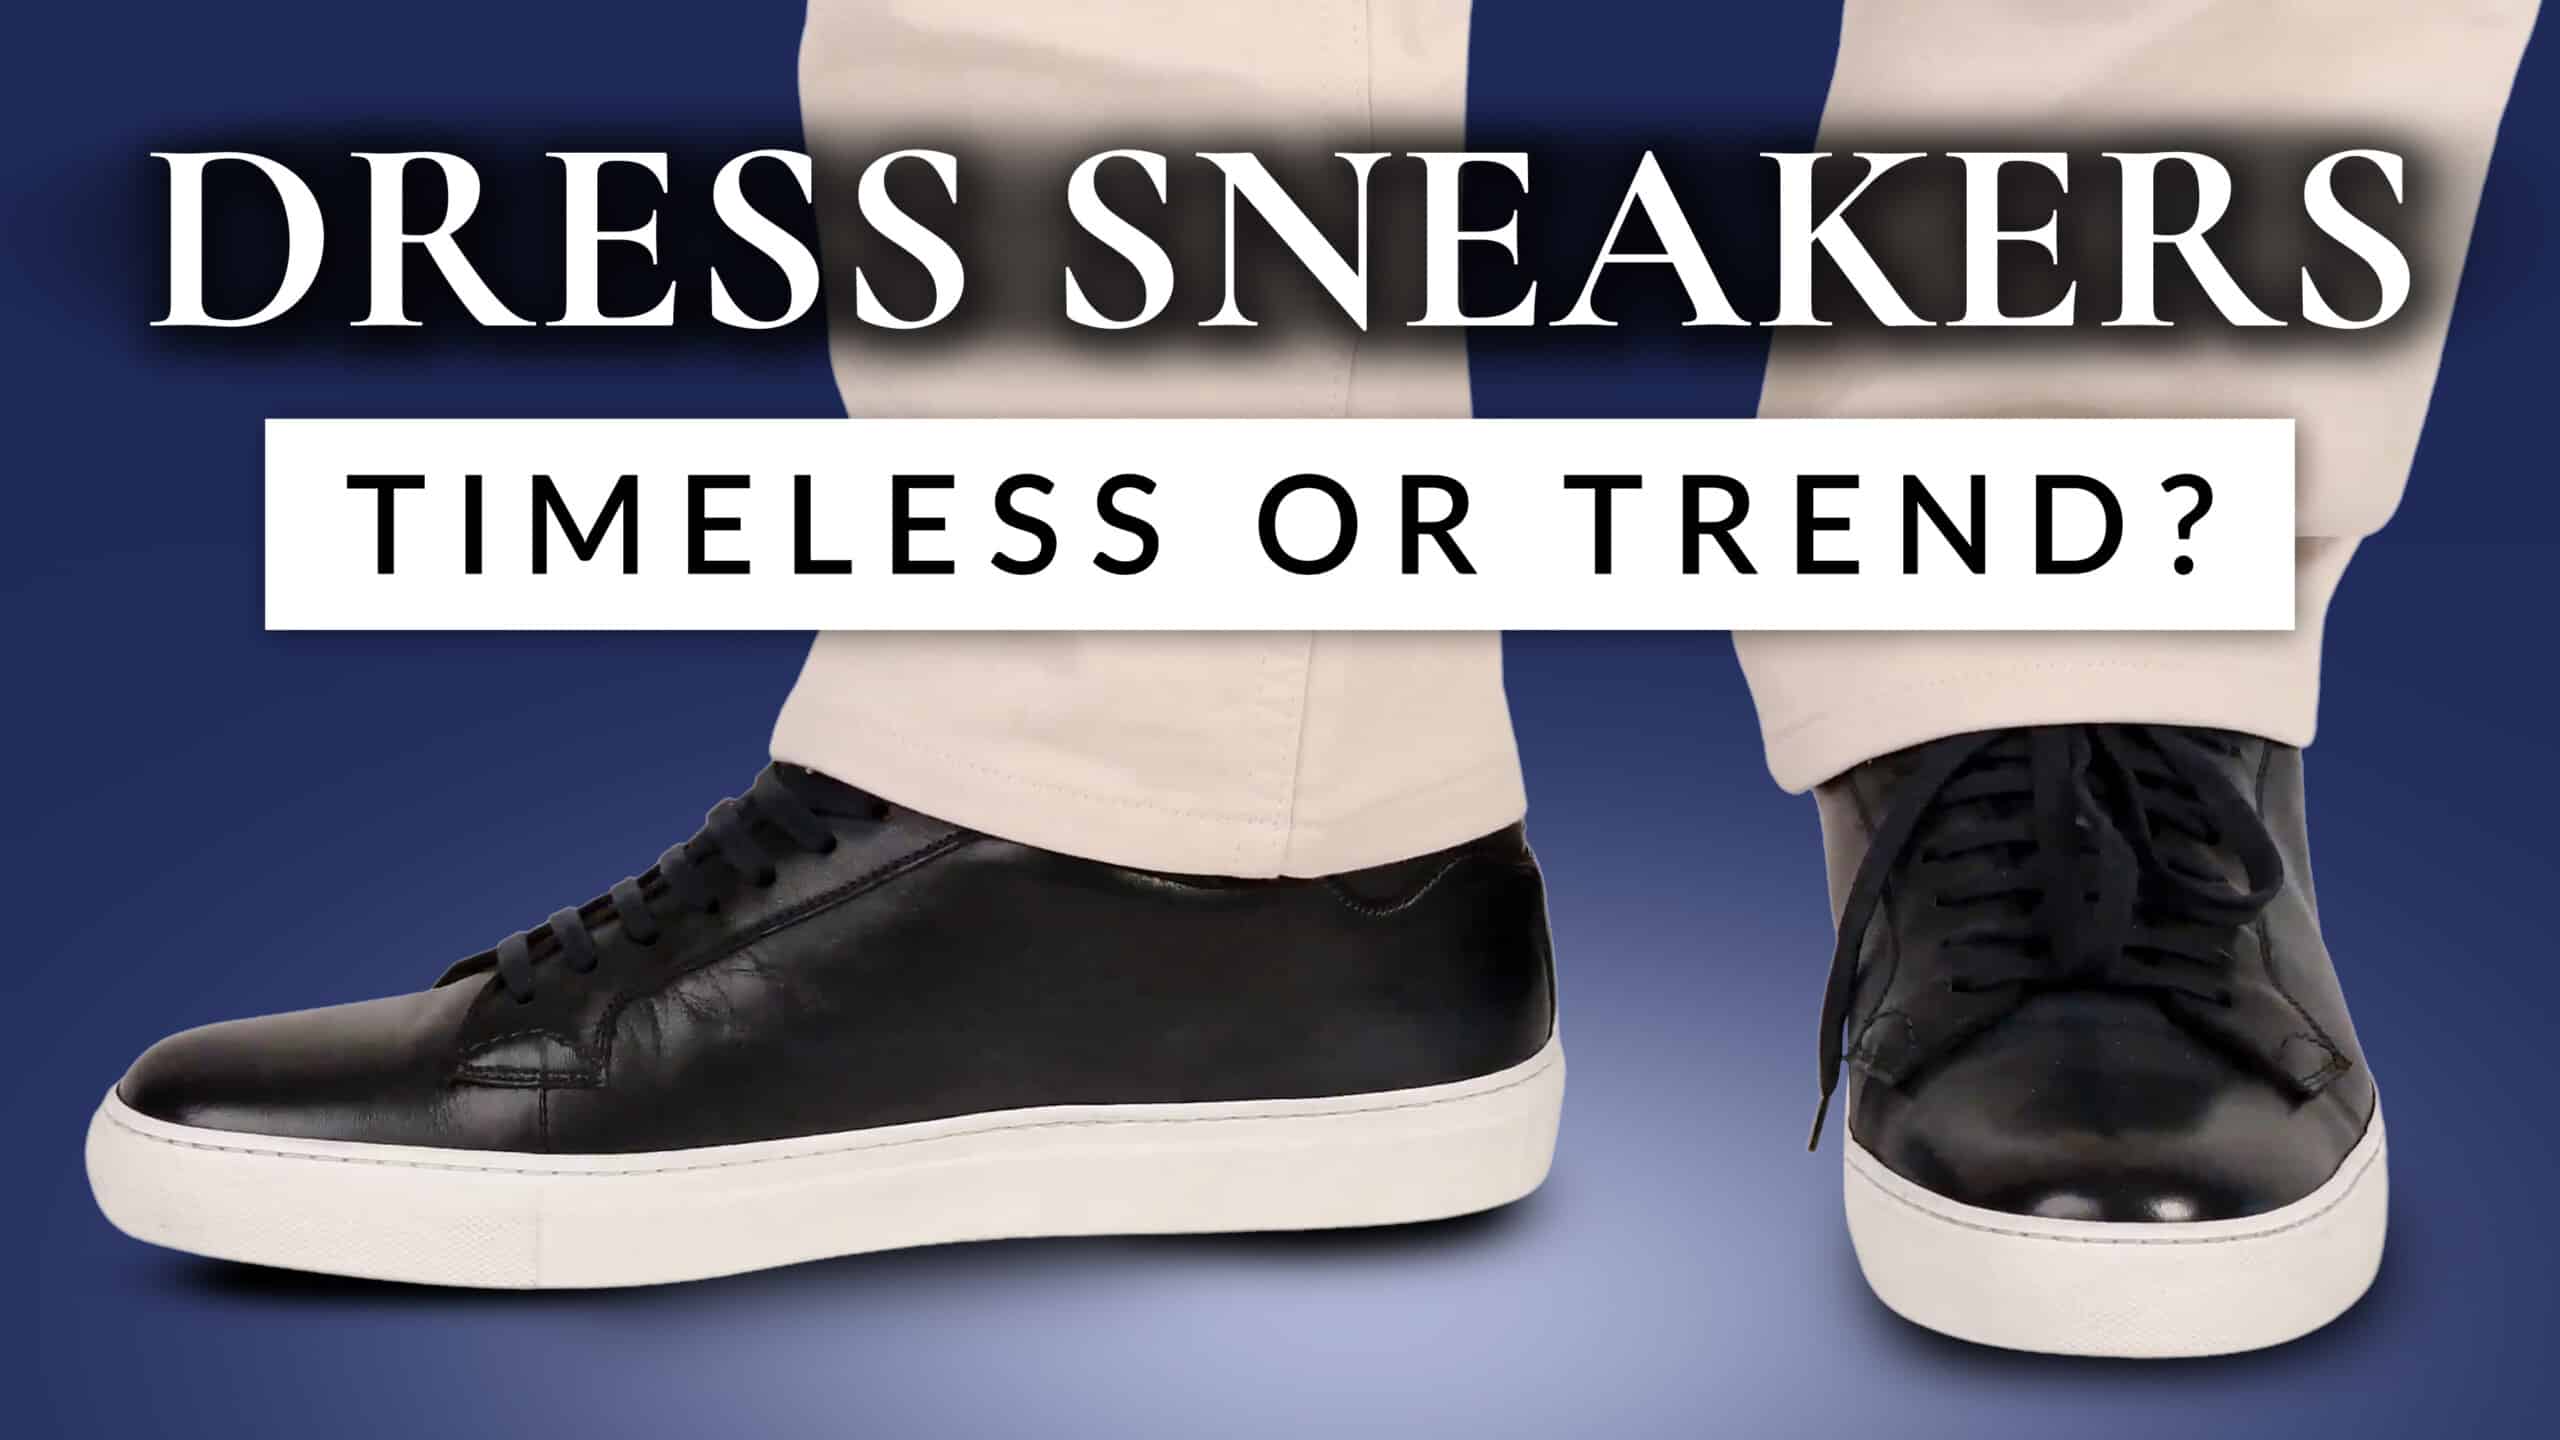 Are Dress Sneakers For Men Timeless, Or Just A Trend?